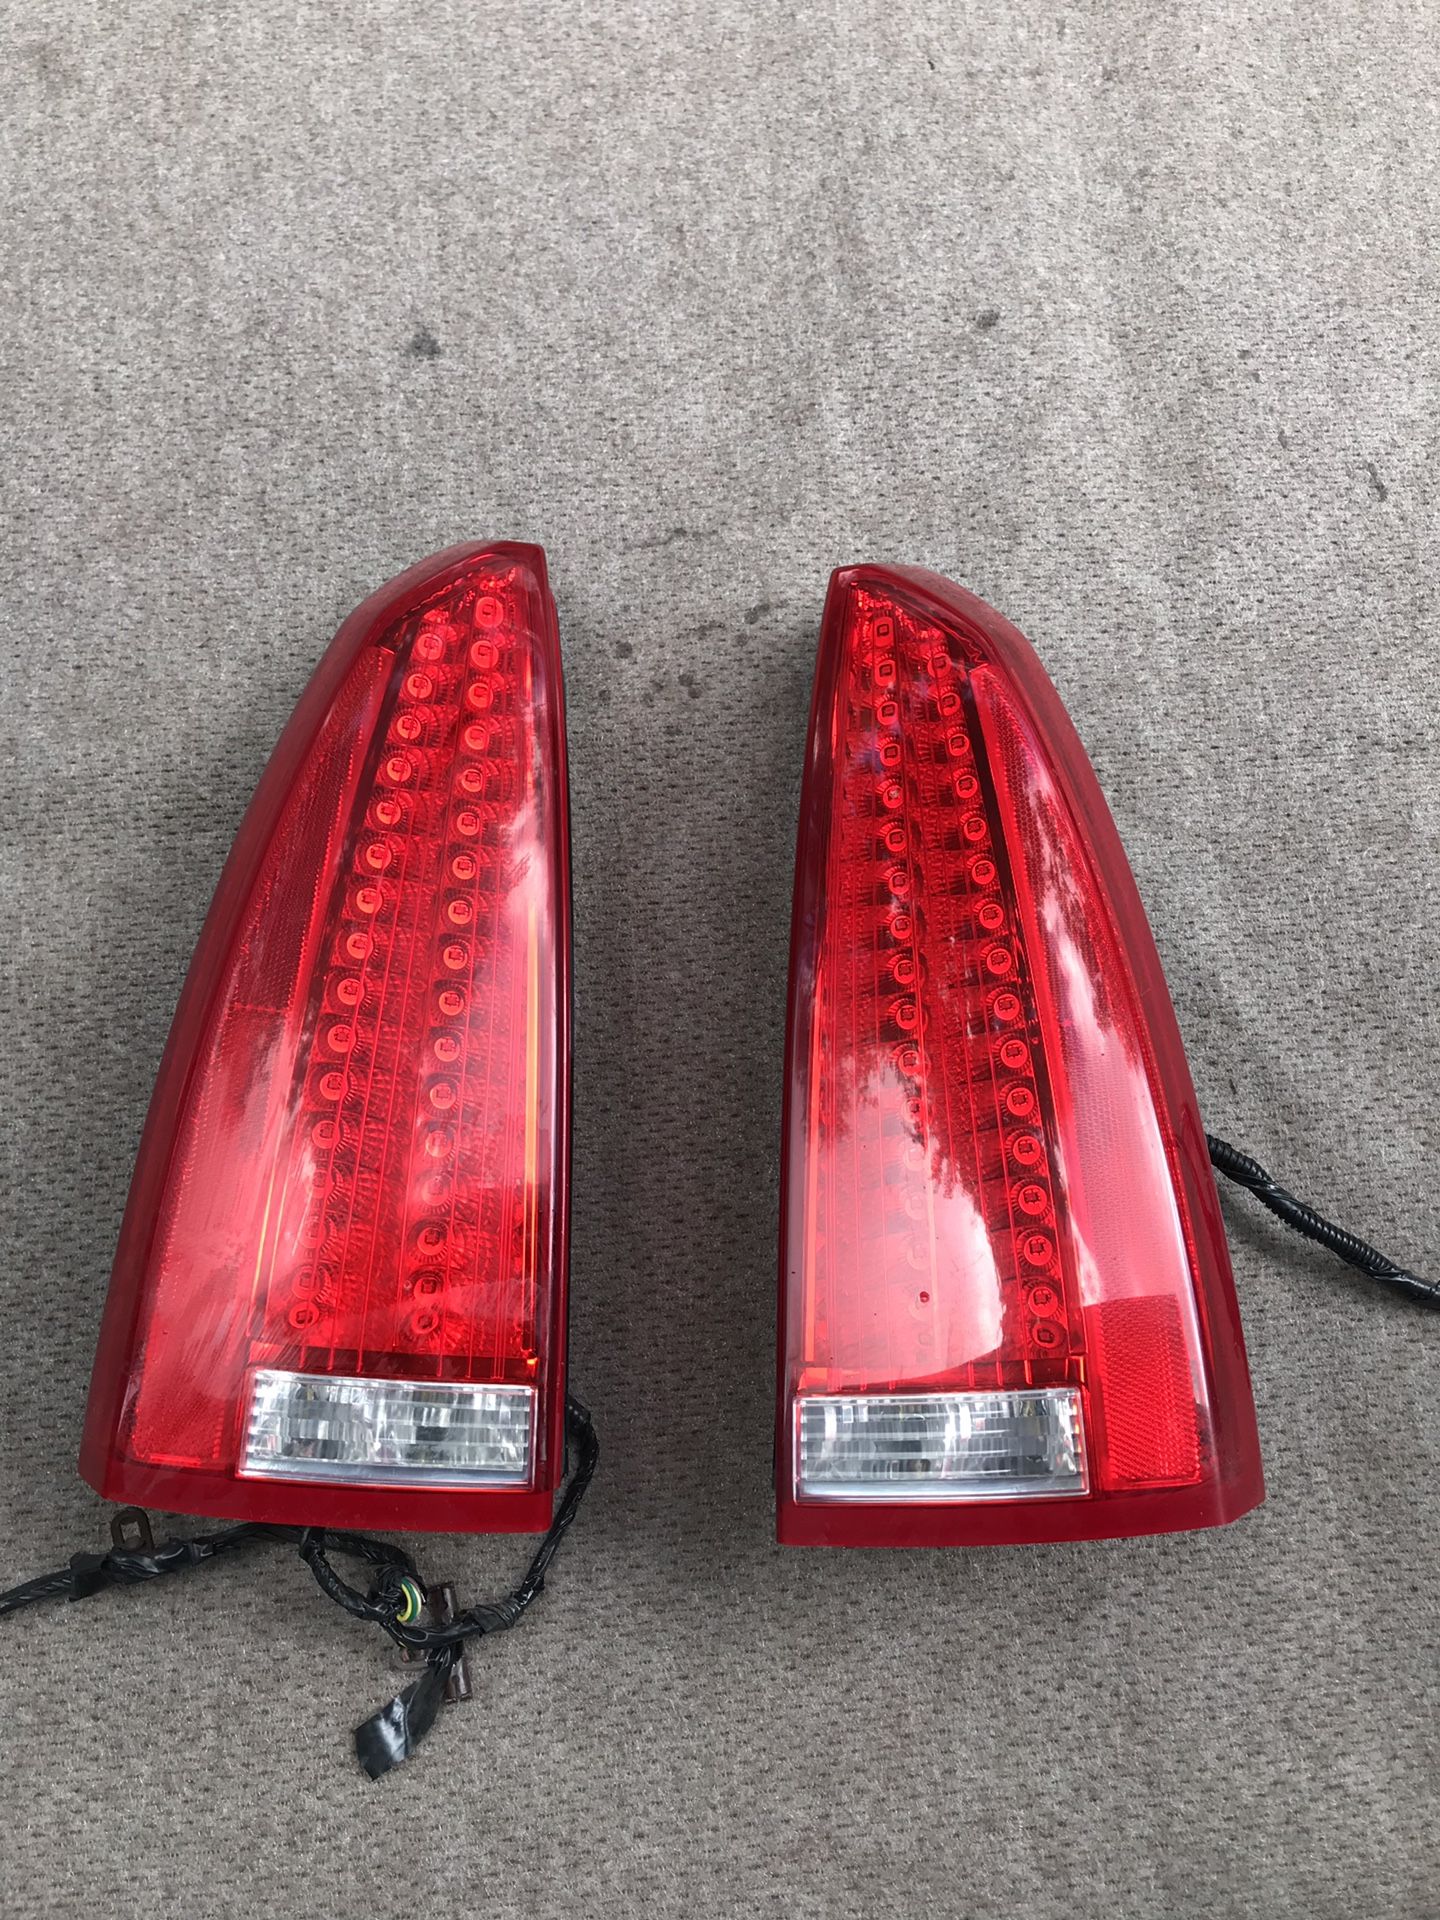 2007 Cadillac DTS Taillights w/Wiring Harness